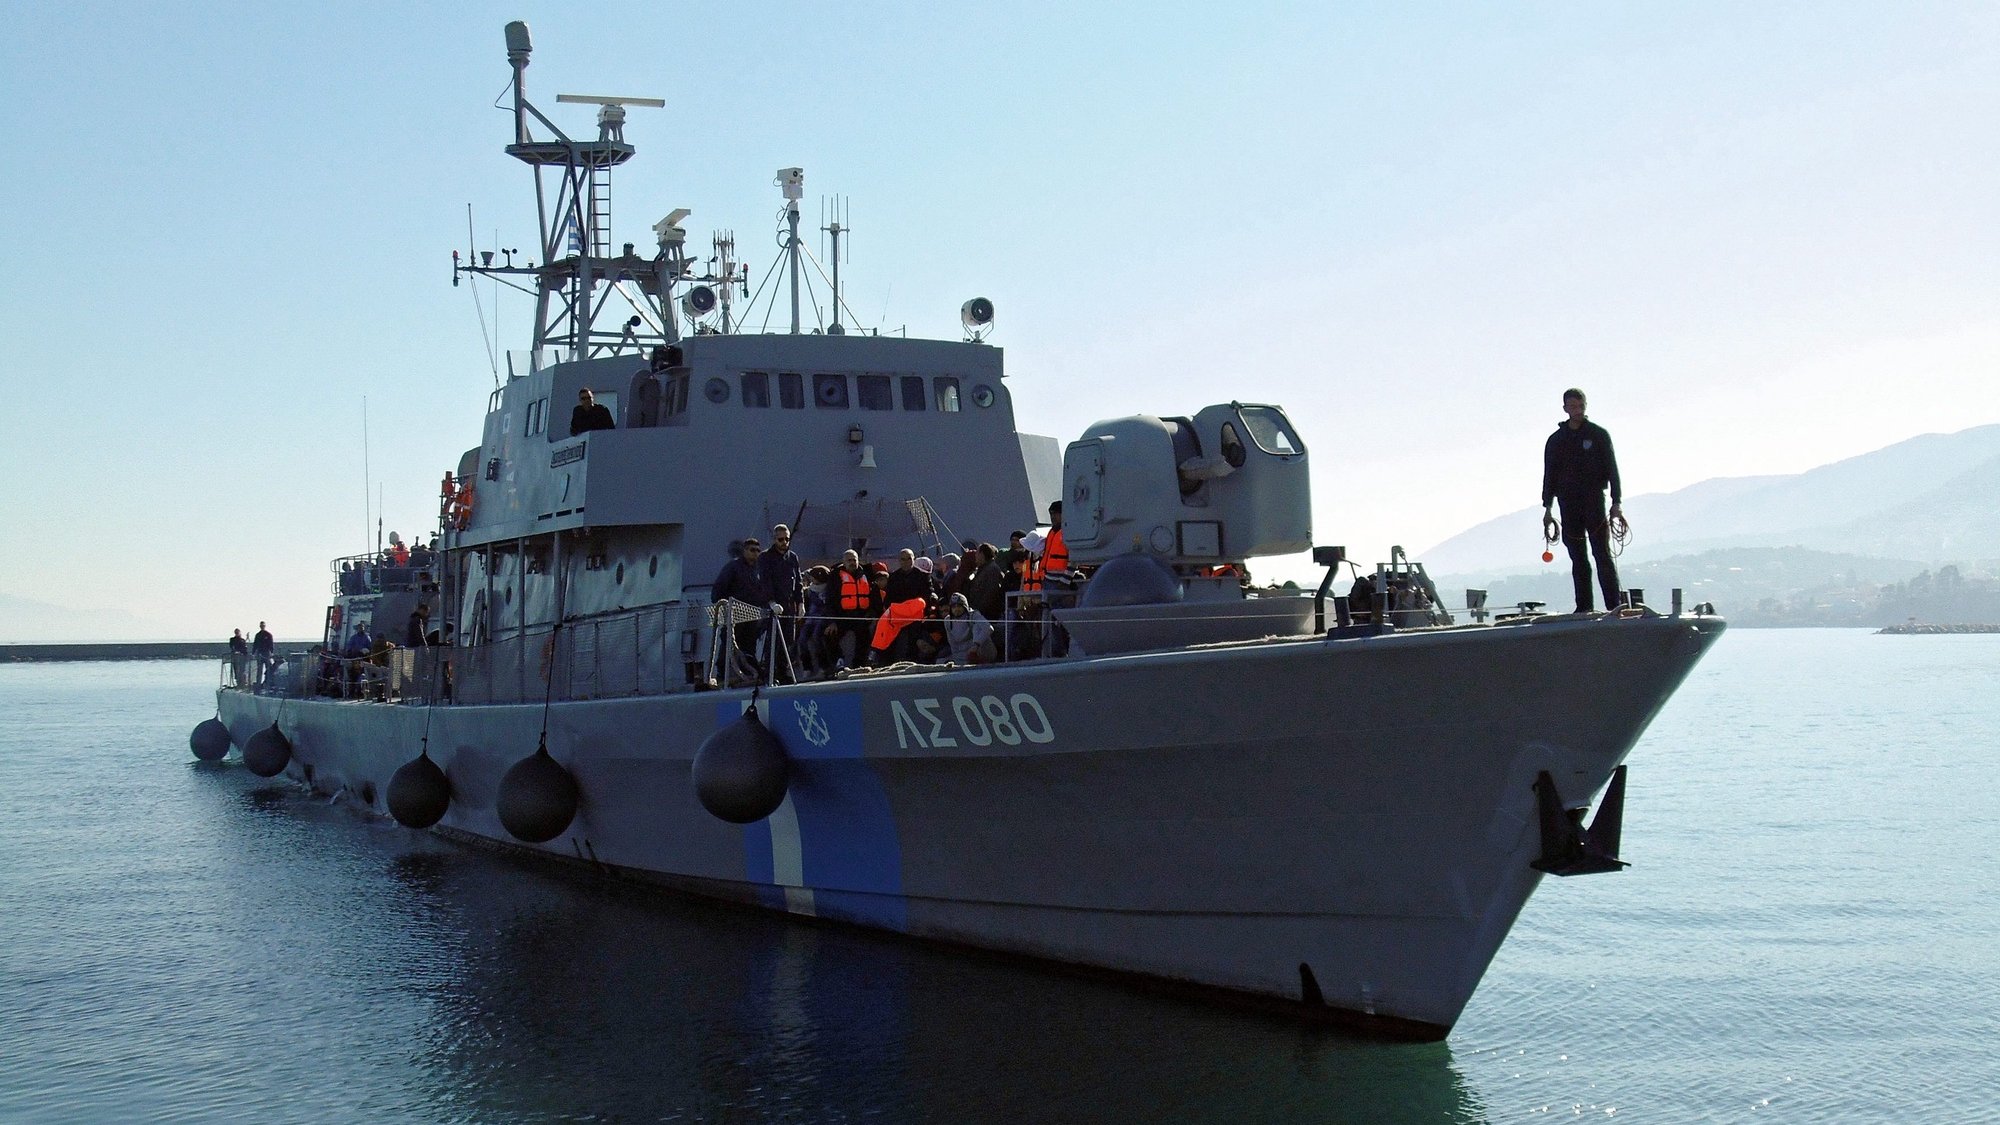 epa05140064 Migrants and refugees arrive ON a coastguard boat in Mytilini, Lesvos Island, Greece, 02 February 2016, The Lesvos coast guard patrol boat &#039;PATH 80 - Agios Efstratios&#039; on 02 February 2016, rescued 413 migrants and refugees found floating adrift in the sea between the island and the Turkish coast - breaking the record for the number brought to safety in a single rescue operation. 2,000 refugees and migrants to the eastern shores of Lesvos, with the coast guard and Frontex called to rescue 1,000 from boats.  EPA/STRATIS BALASKAS